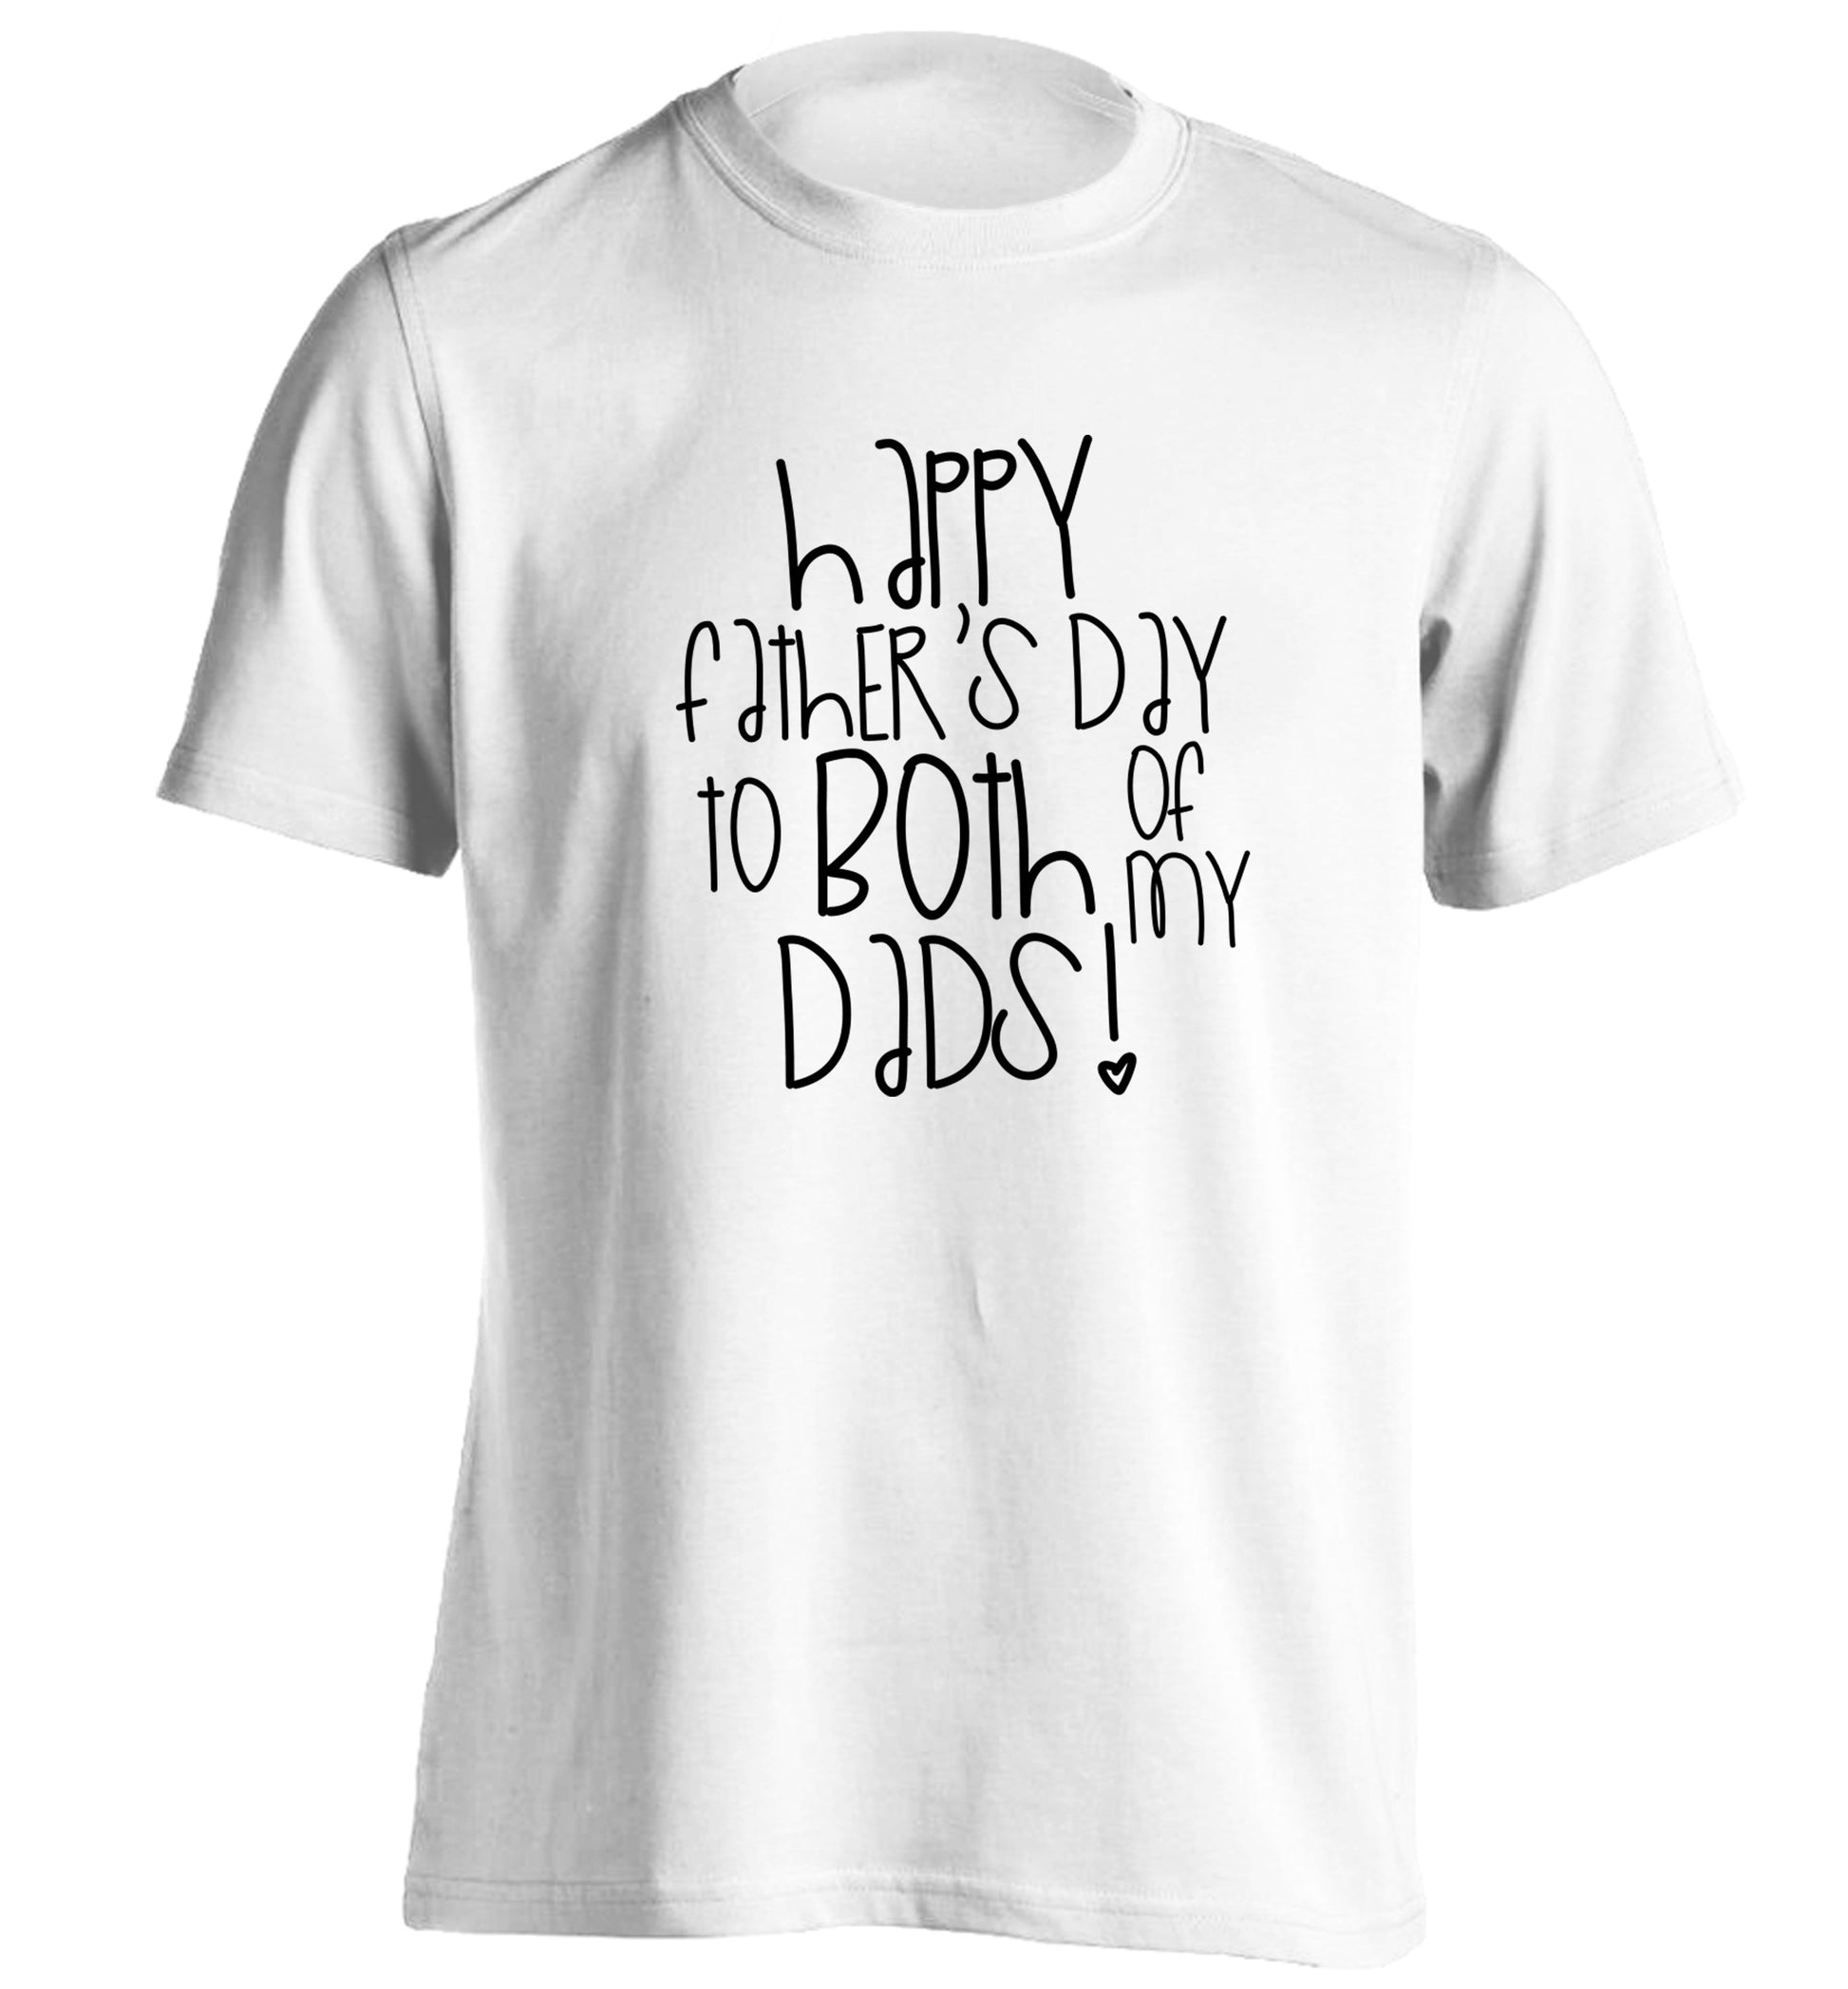 Happy father's day to both of my dads adults unisex white Tshirt 2XL